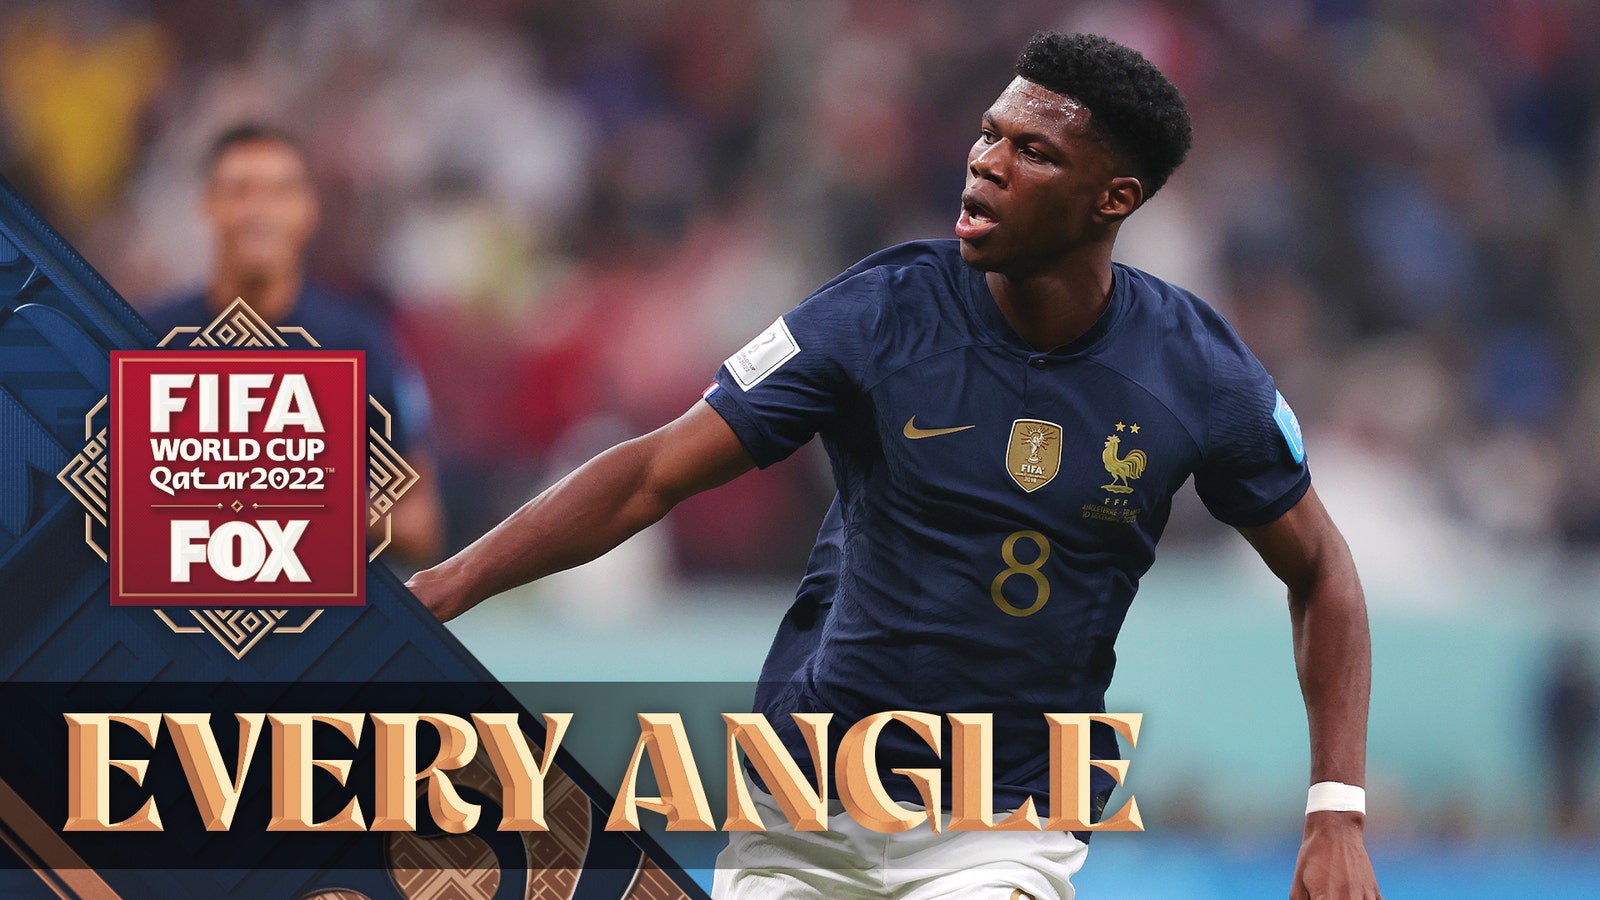 Aurelien Tchouameni makes a STATEMENT after scoring for France in the 2022 FIFA World Cup